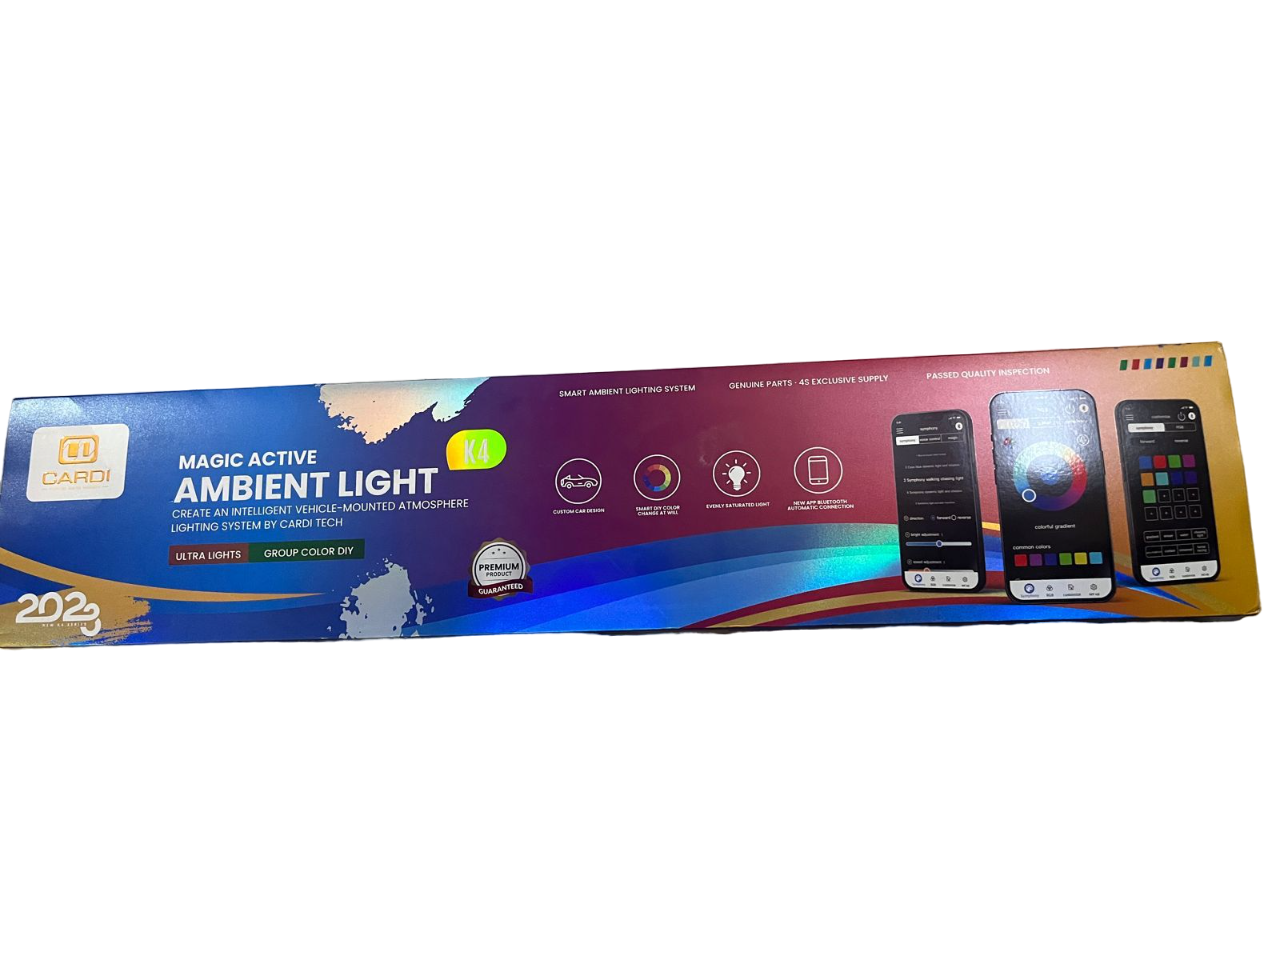 Cardi K4 Active Ambient Light Symphony Mode 7th Generation 10 in 1 wireless LED Atmosphere Lights for Automotive Car Interior Ambient acrylic strips (1 Year warranty,app plus remote) Image 